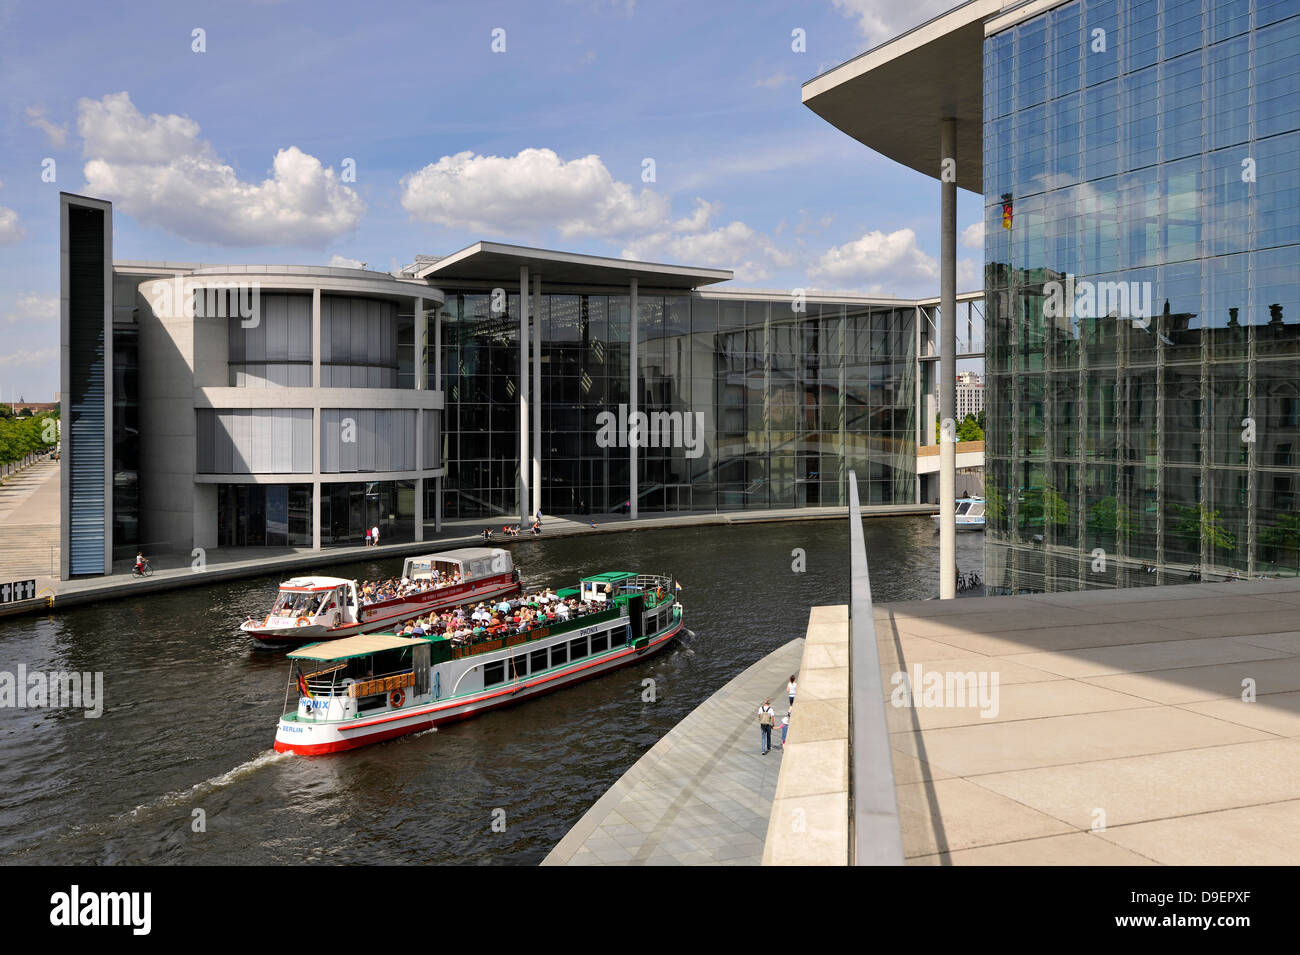 Active ship traffic, holiday boats before Marie-Elisabeth-L?ders-Haus and Paul's L?be house, Reichstag shore, Spree curve, gover Stock Photo